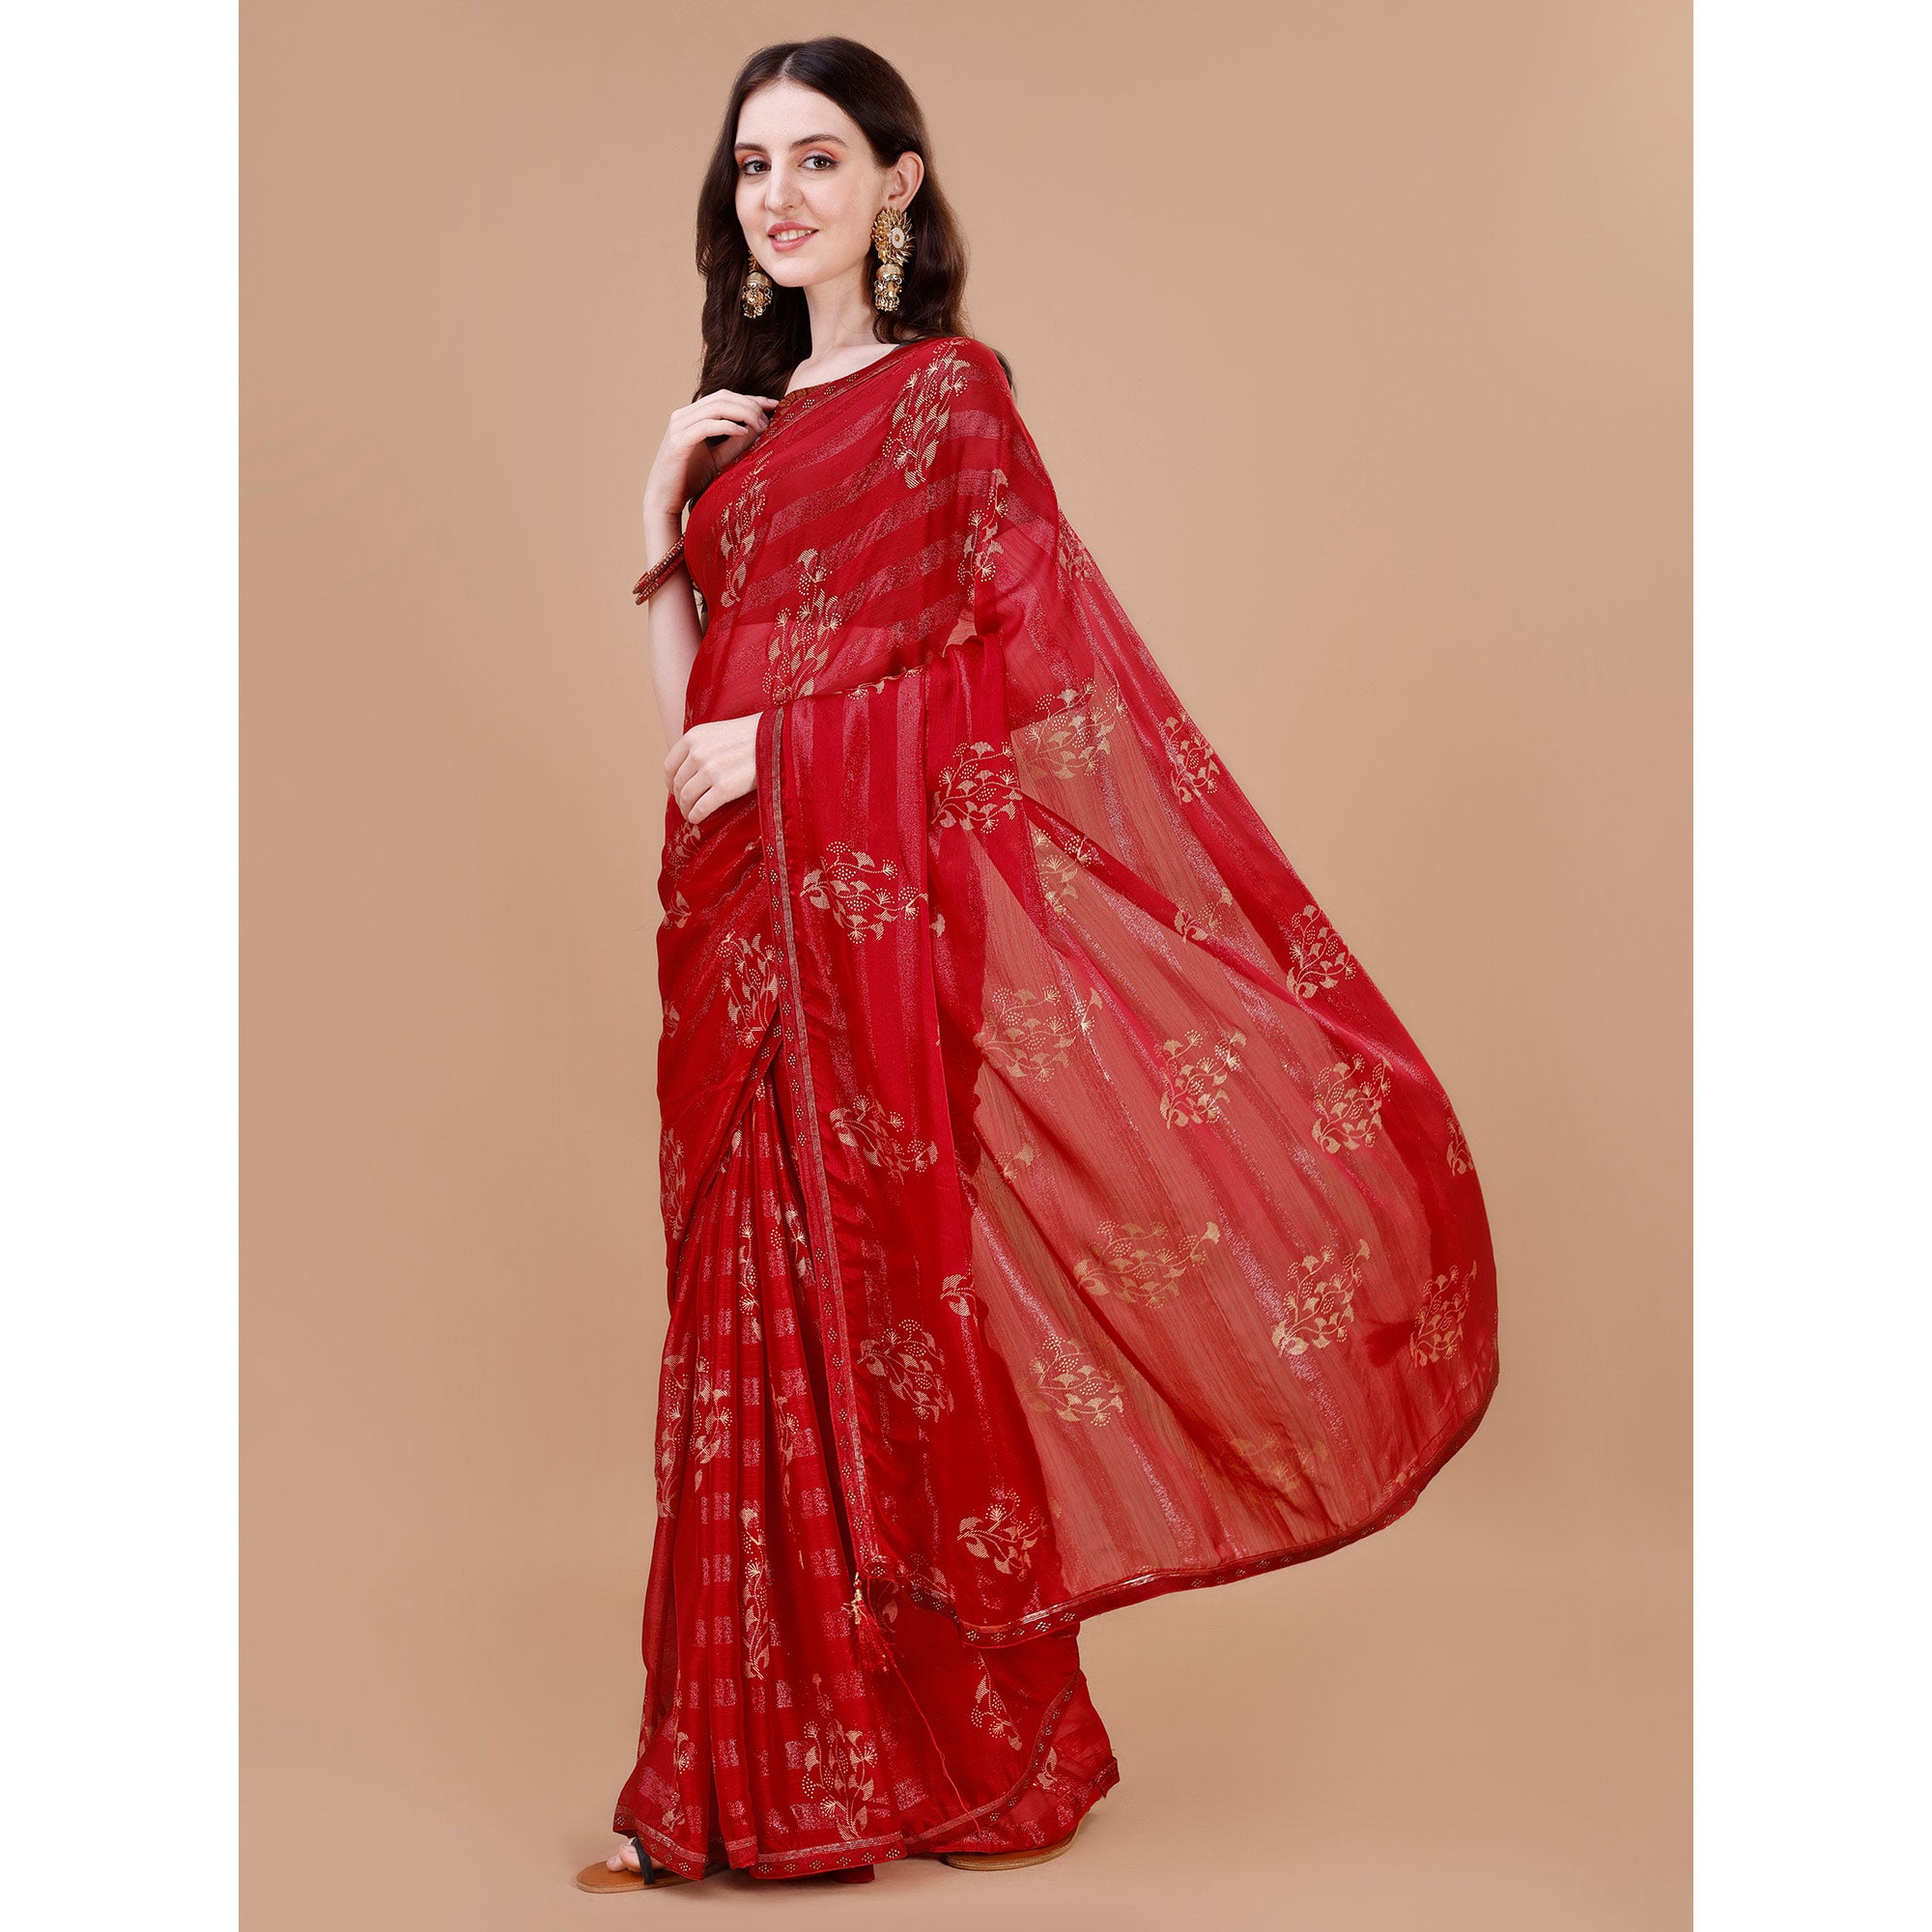 Red Foil Printed Chiffon Saree With Lace Border